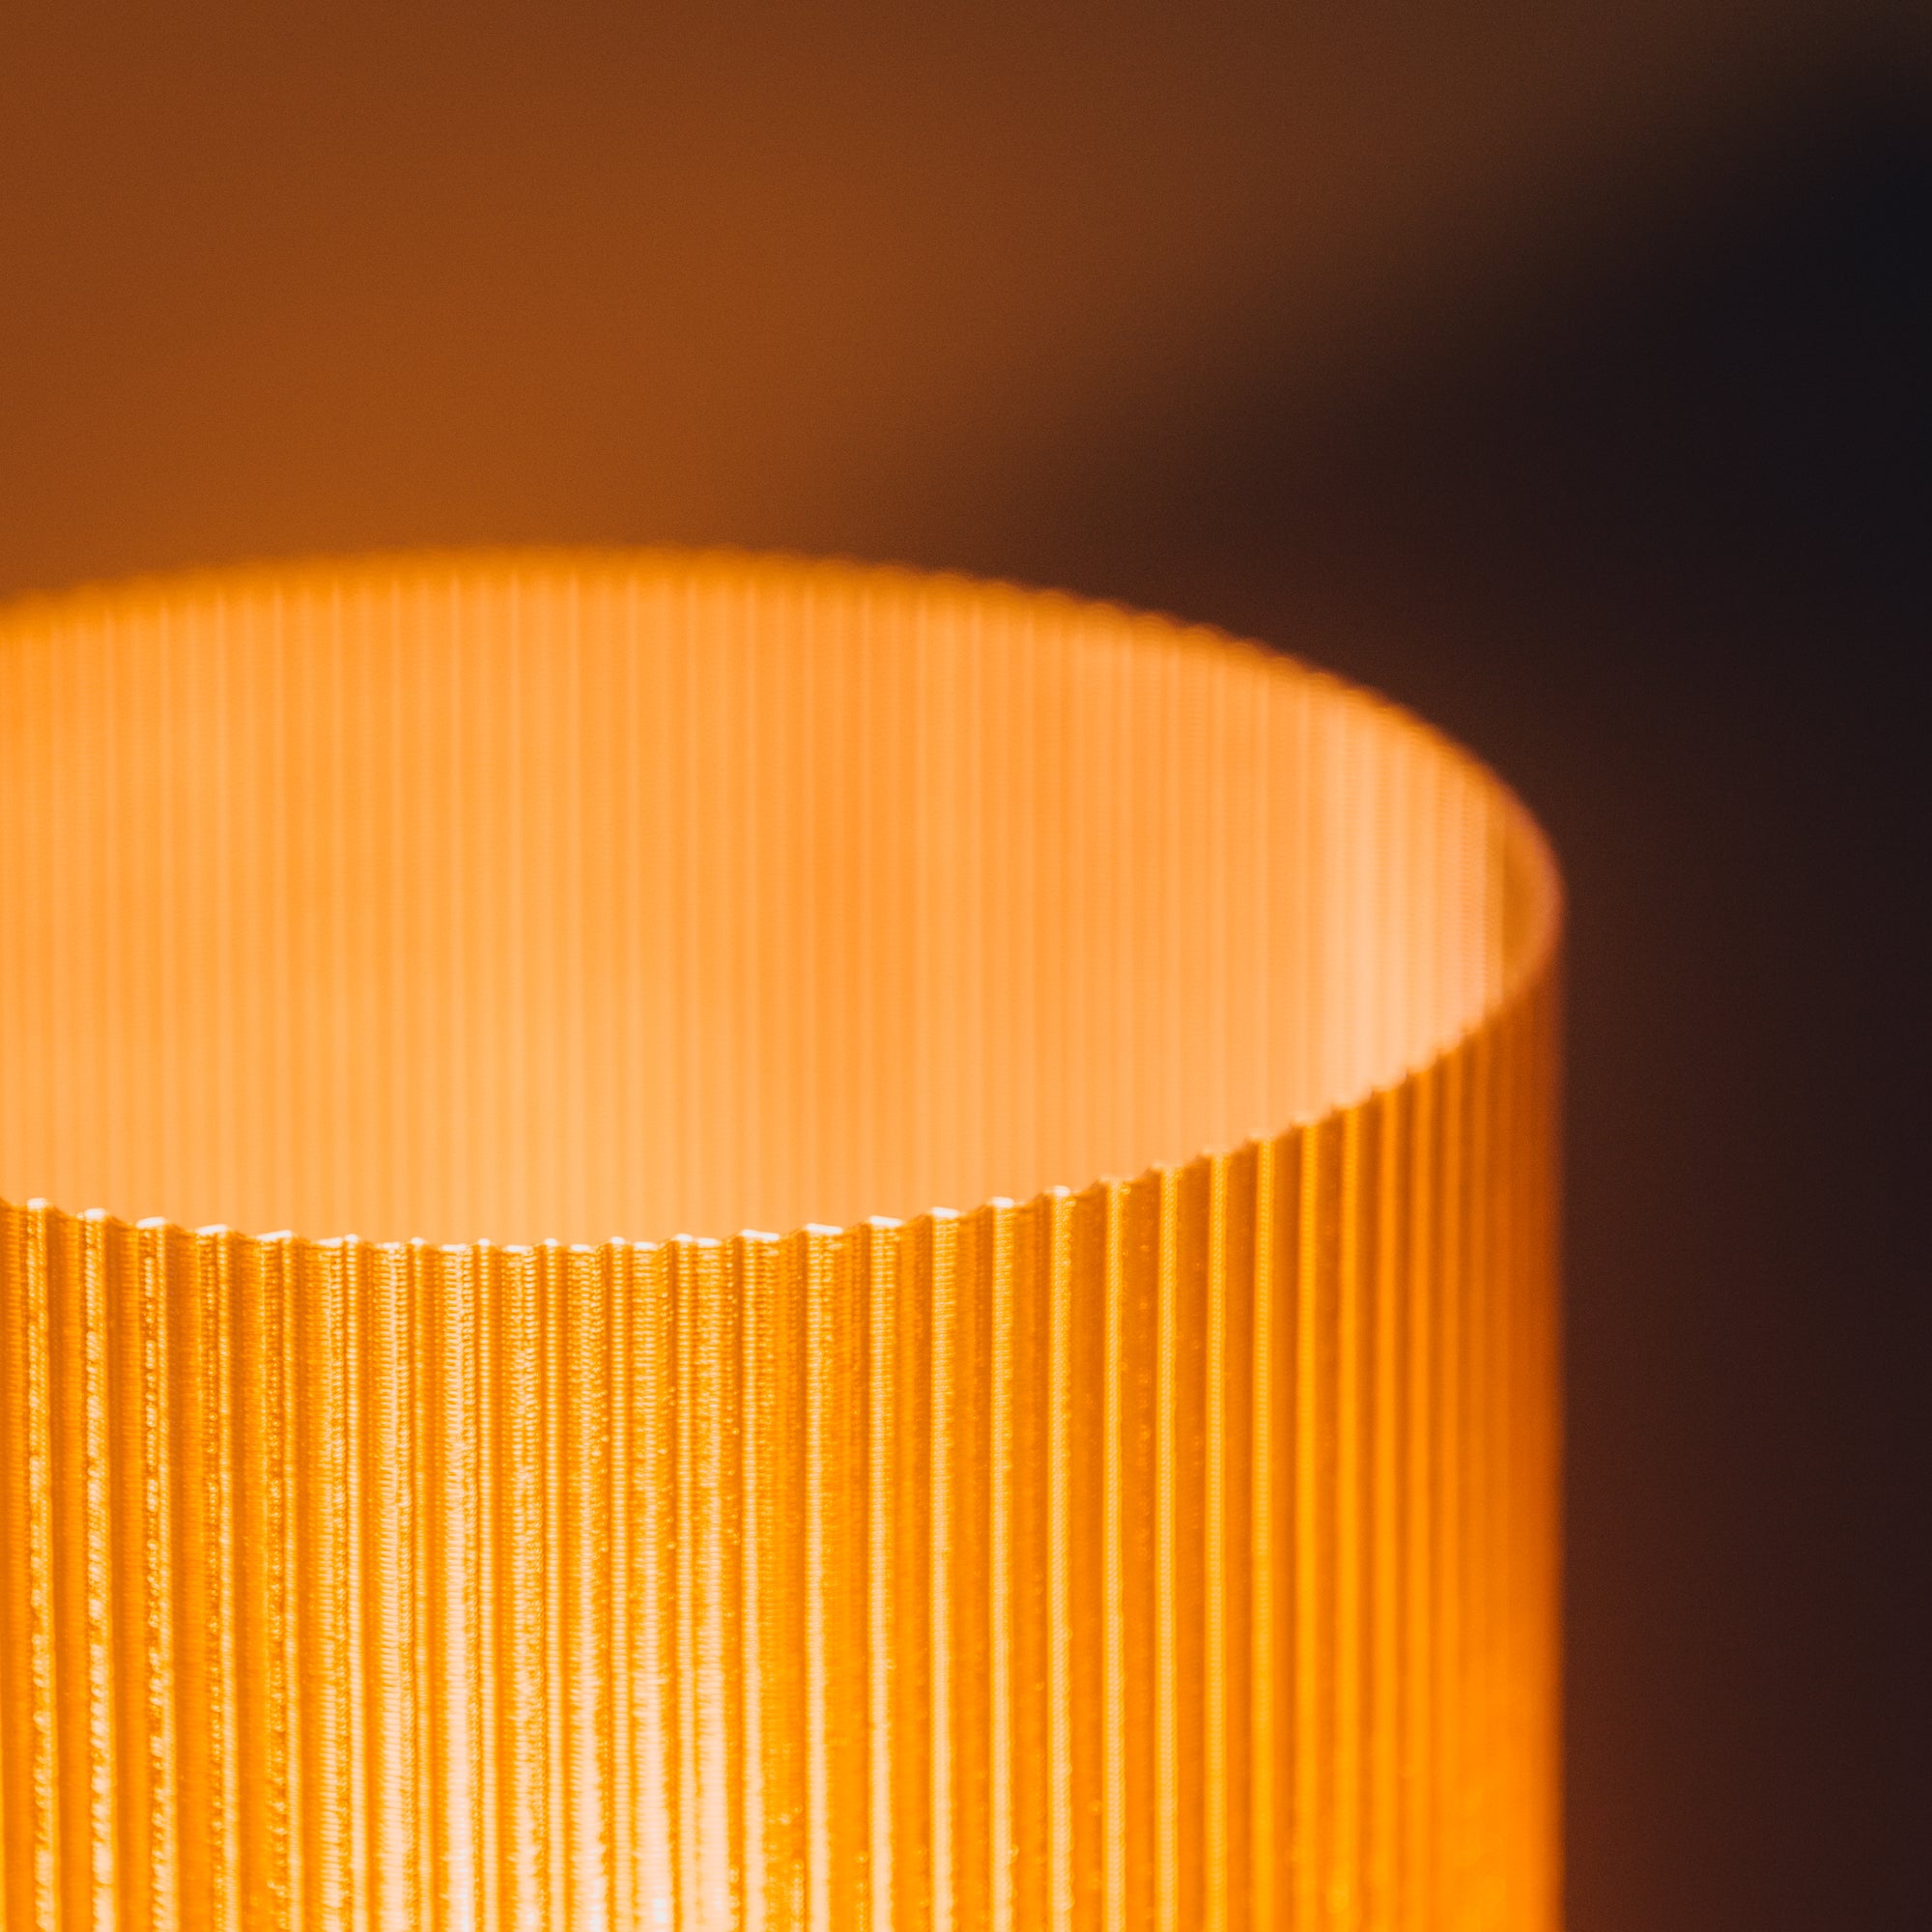 Lux Tubus - The warm lamp made from recycled bottles